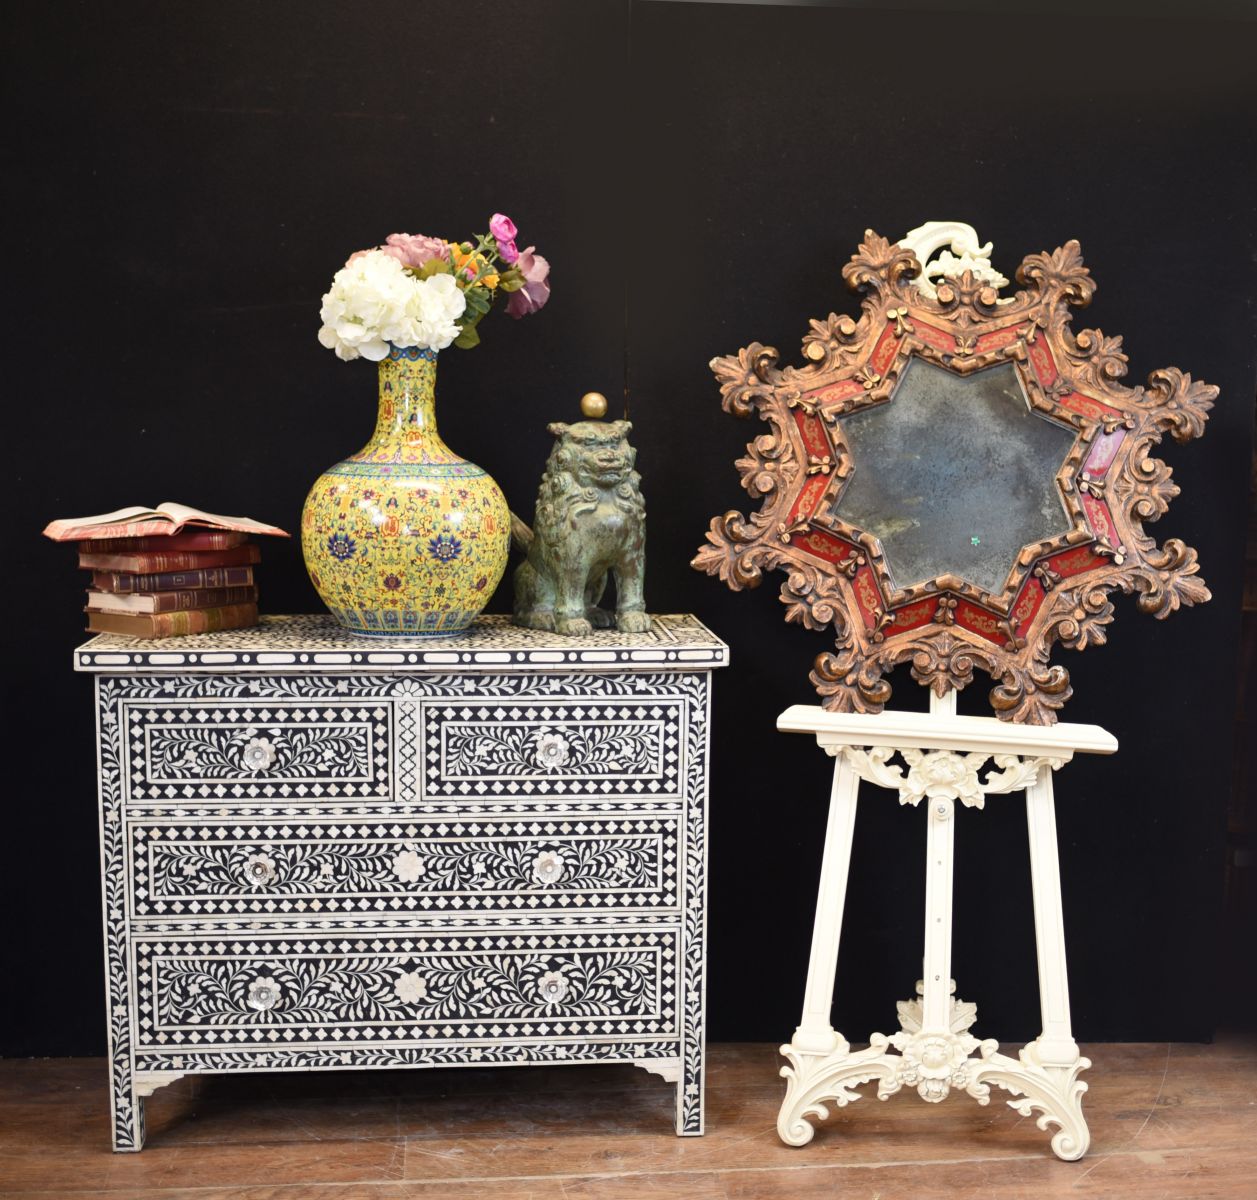 Decorative arts and antiques in South Hertfordshire